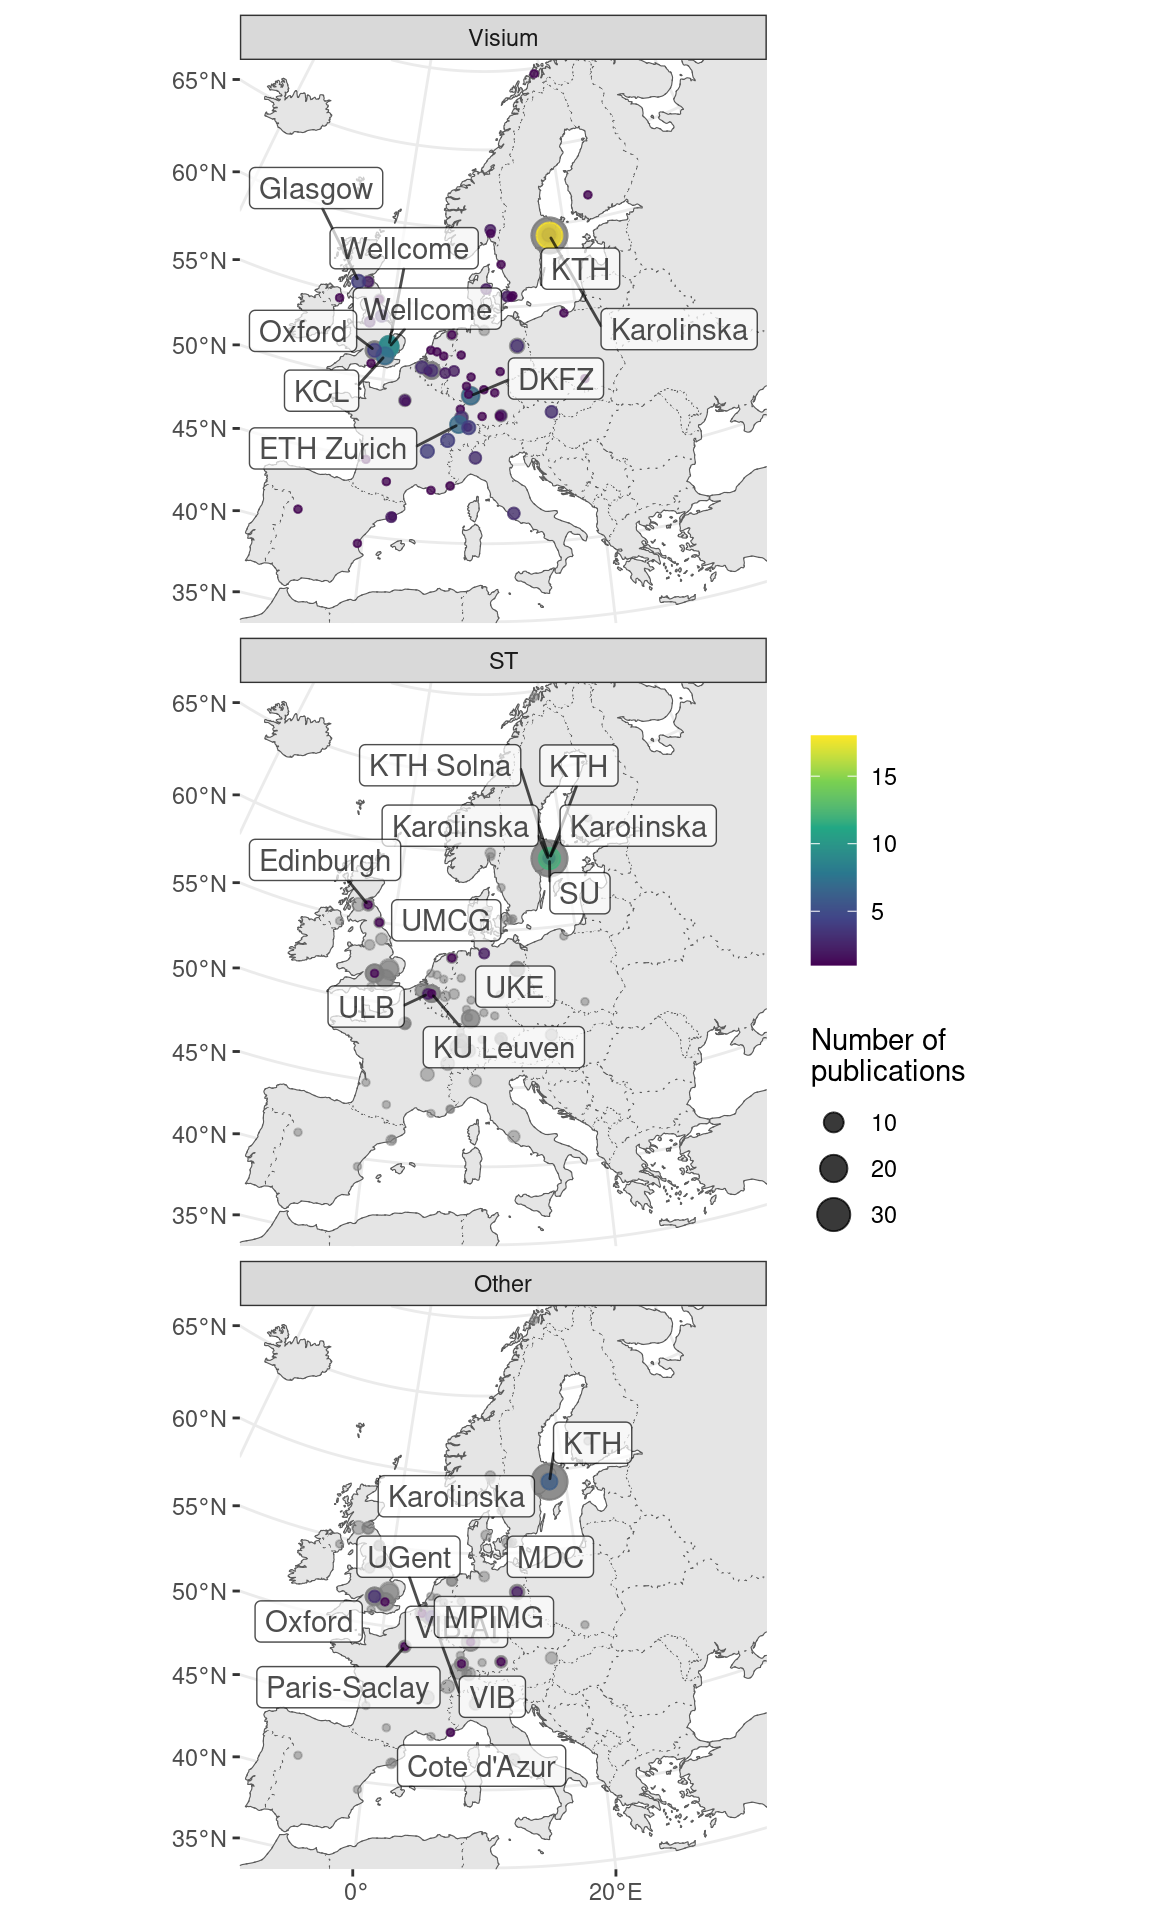 Cities and institutions using the two most popular tehcnologies in western Europe. Preprints are included.